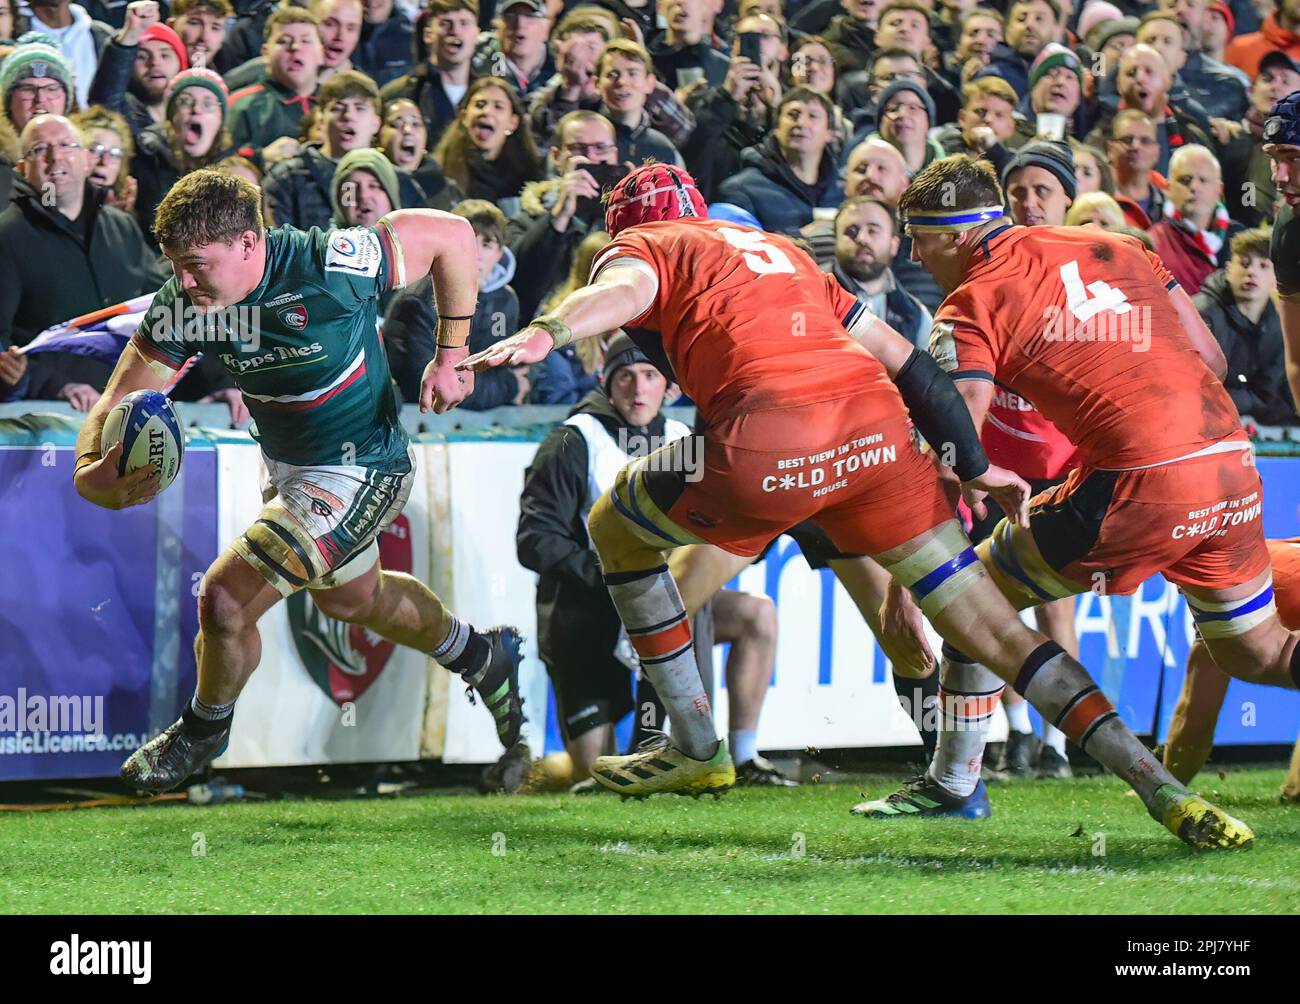 Leicester Tigers Rugby v Edinburgh Rugby Team at the Mattioli Stadium in Leicester, UK on 31 March 2023 - Jasper Weise (Leicester Tigers) scores Tri in second Half.  Jasper Weise (Leicester Tigers)  score a Tri at the Mattioli Rugby Stadium, Leicester, Uk  Credit: Mark Dunn/Alamy Live News Stock Photo